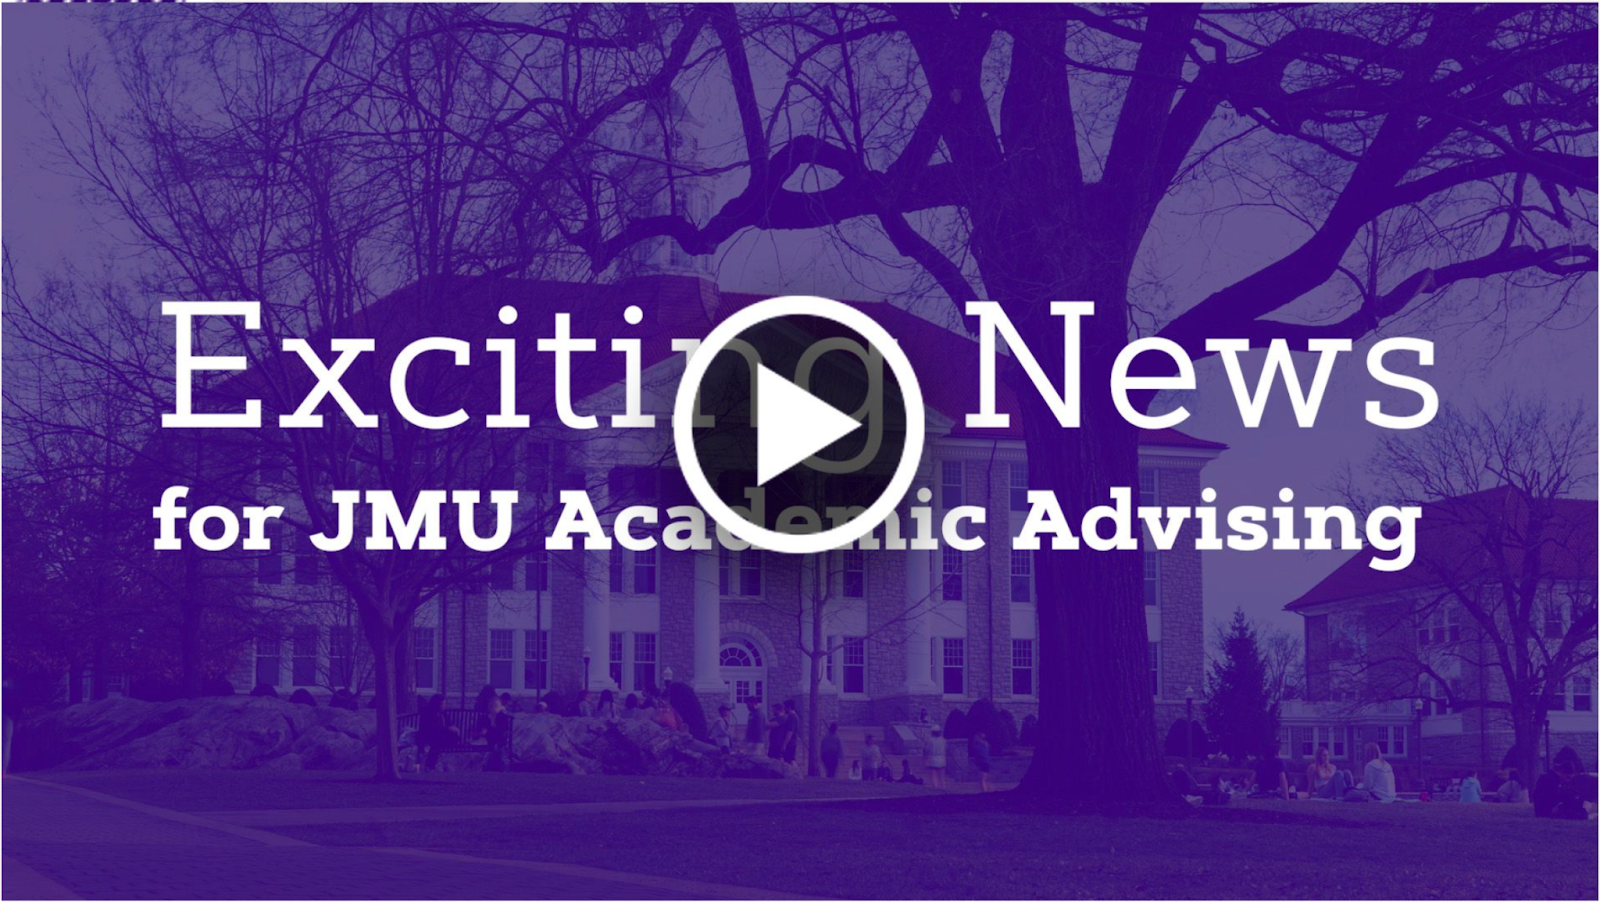 Exciting News for JMU Academic Advising